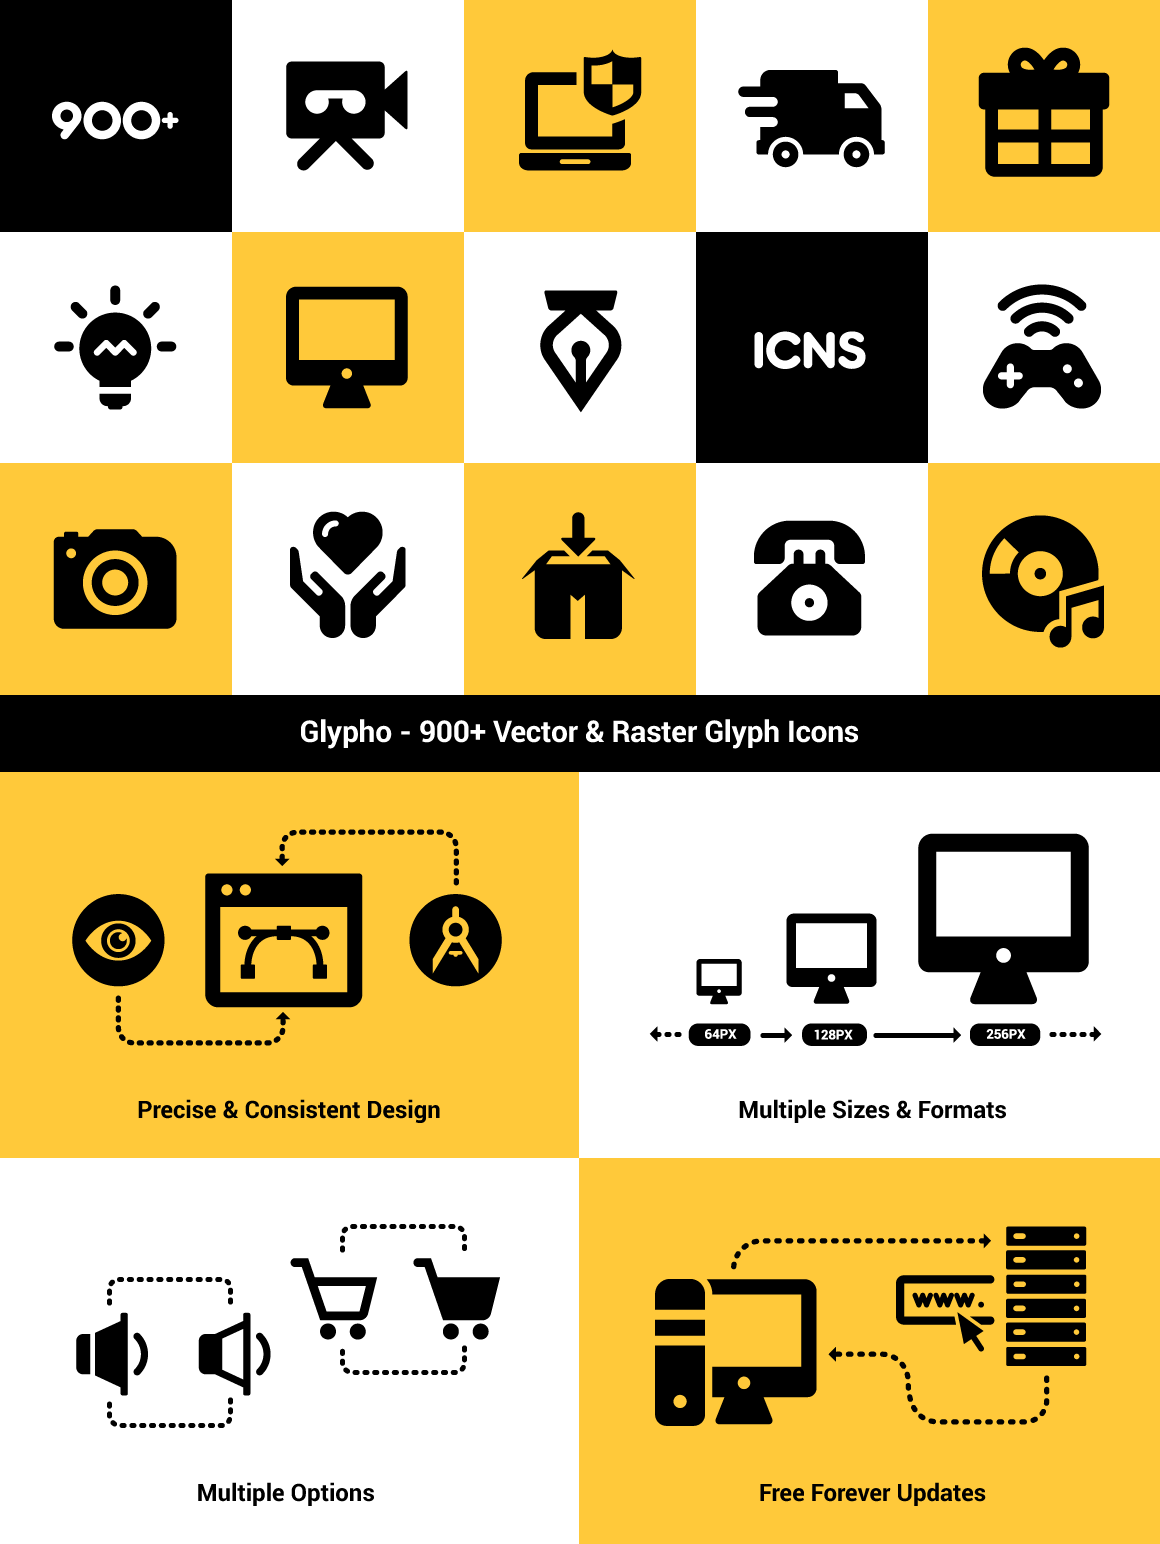 The Glypho icon pack - More than 900 vector glyphicons for download.